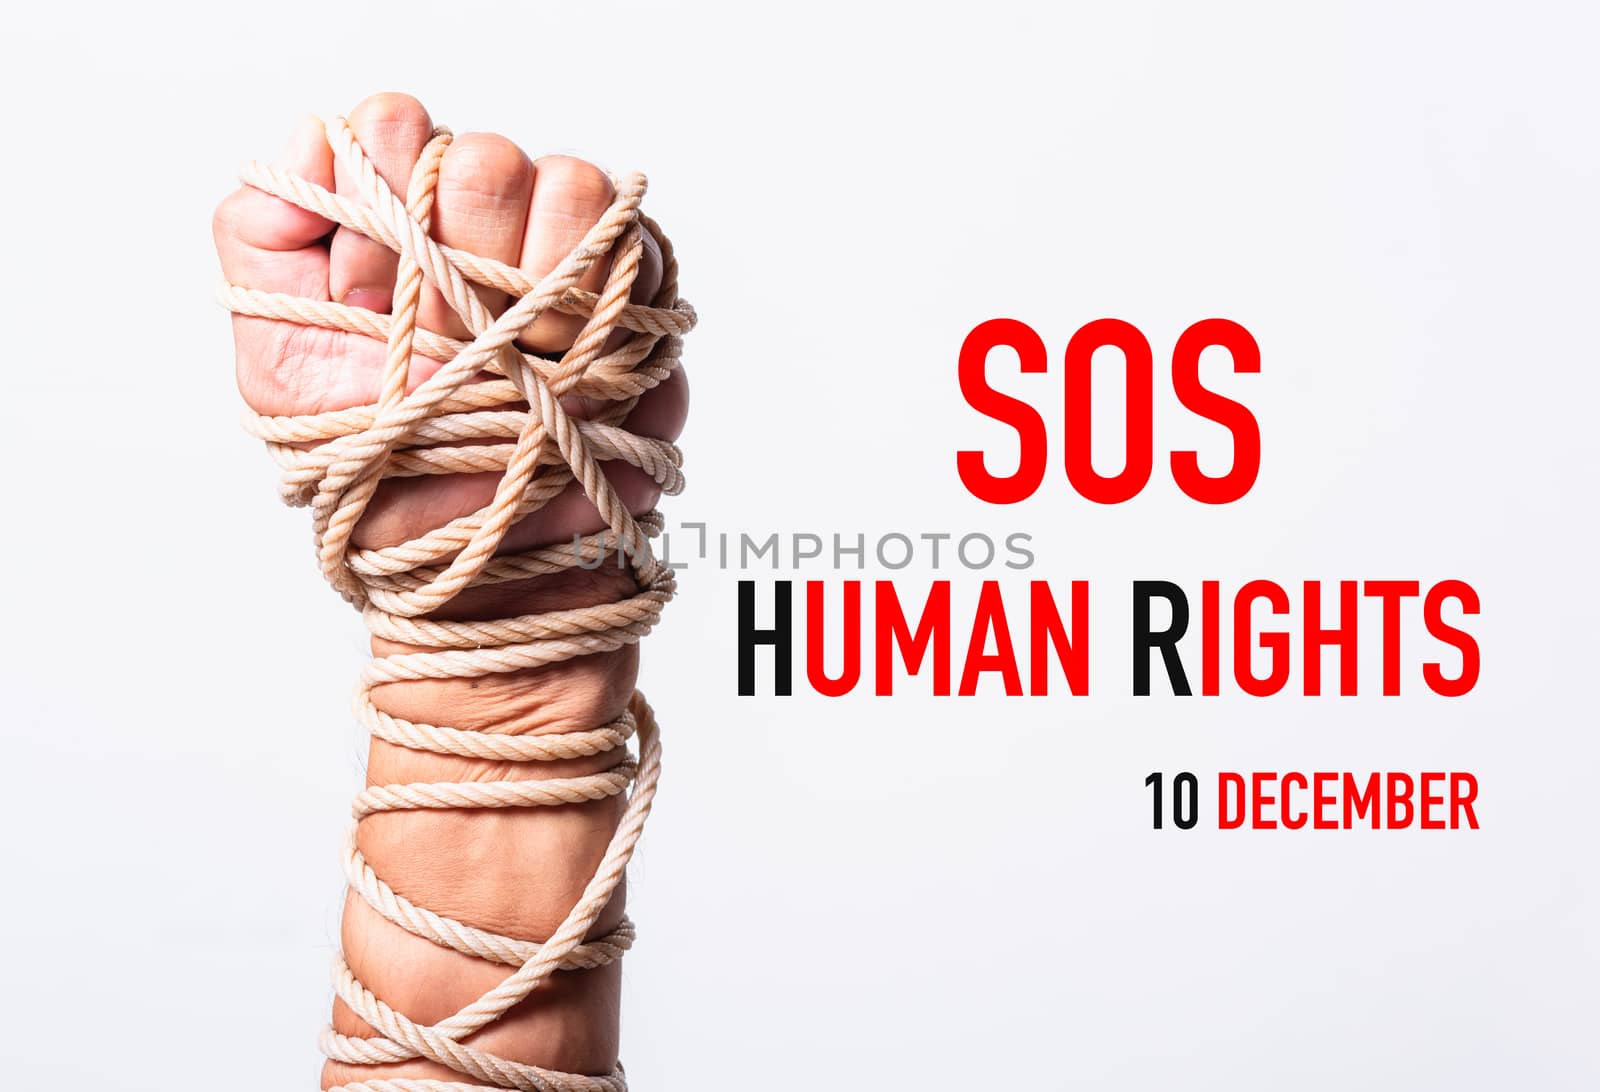 Rope on fist hand with SOS HUMAN RIGHTS DAY 10 december text by Sorapop